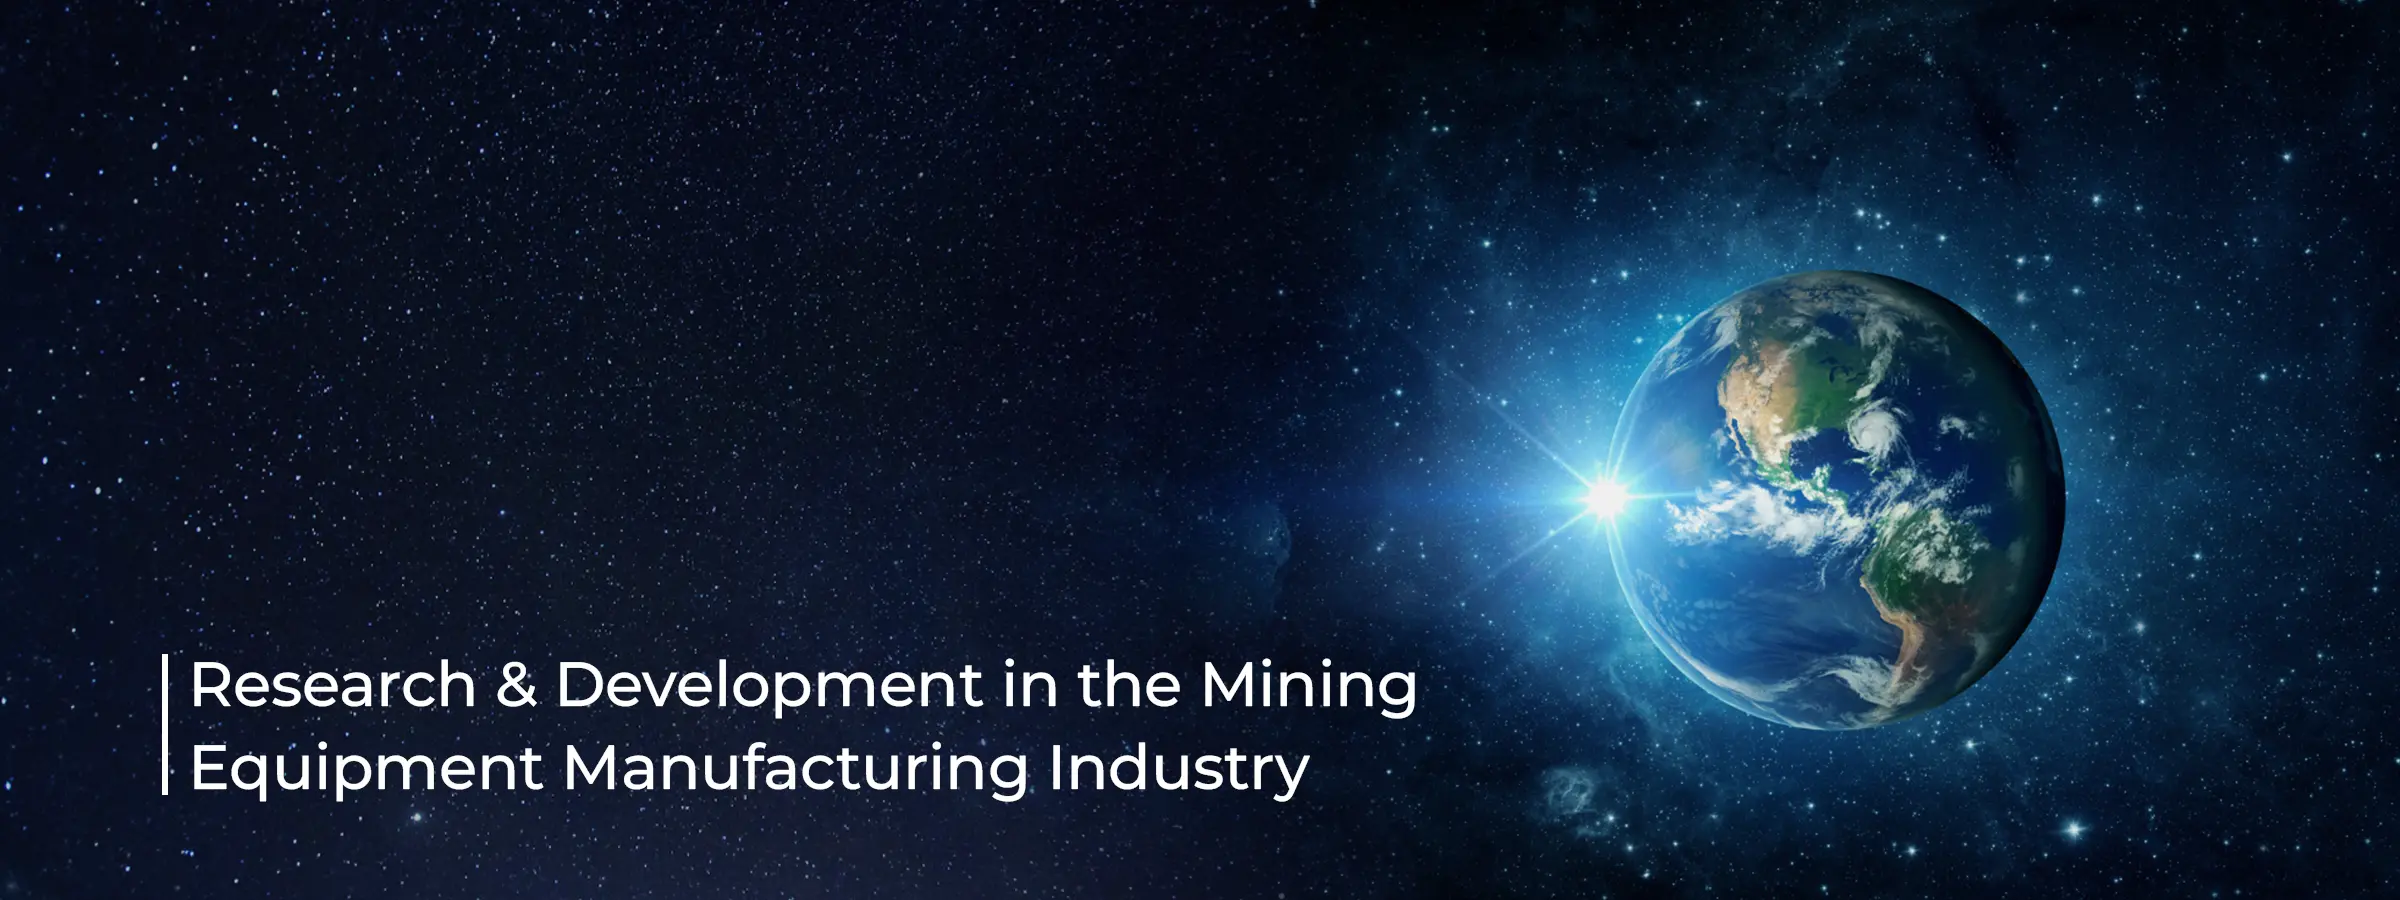 research-and-development-in-mining